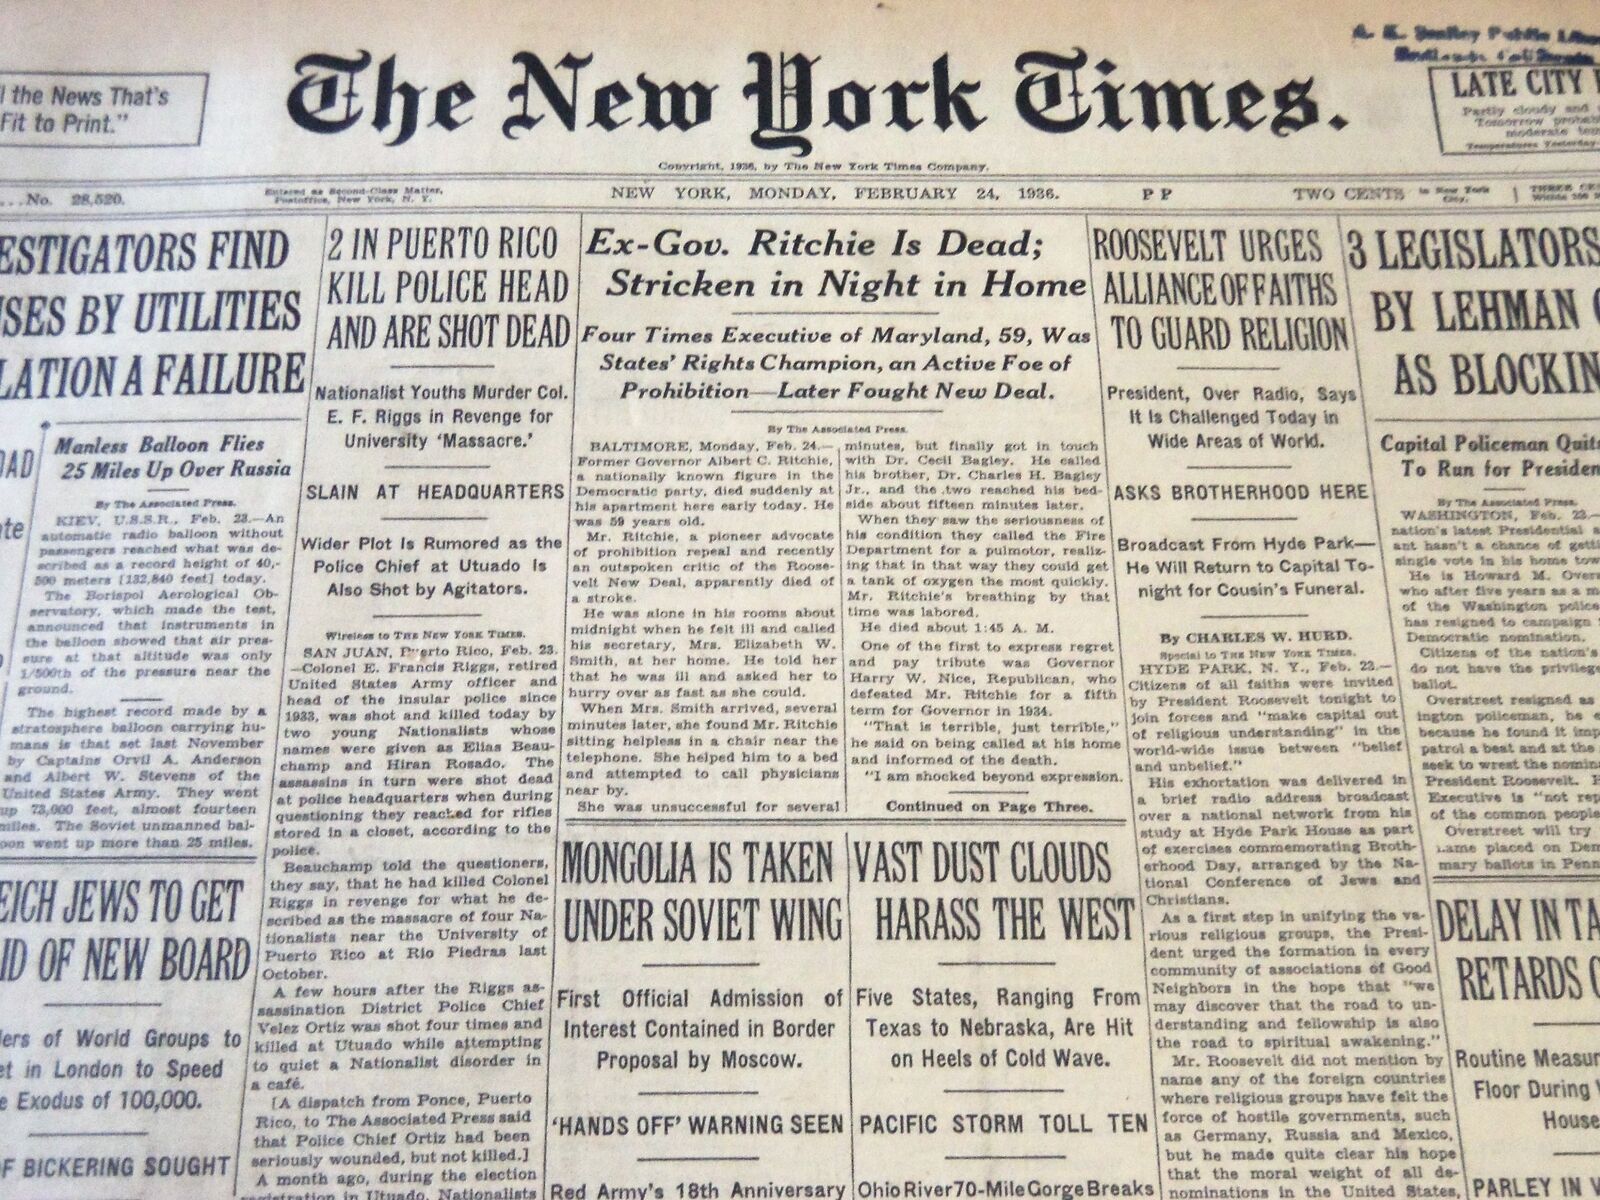 1936 FEBRUARY 24 NEW YORK TIMES - EX-GOV RITCHIE IS DEAD - NT 6702